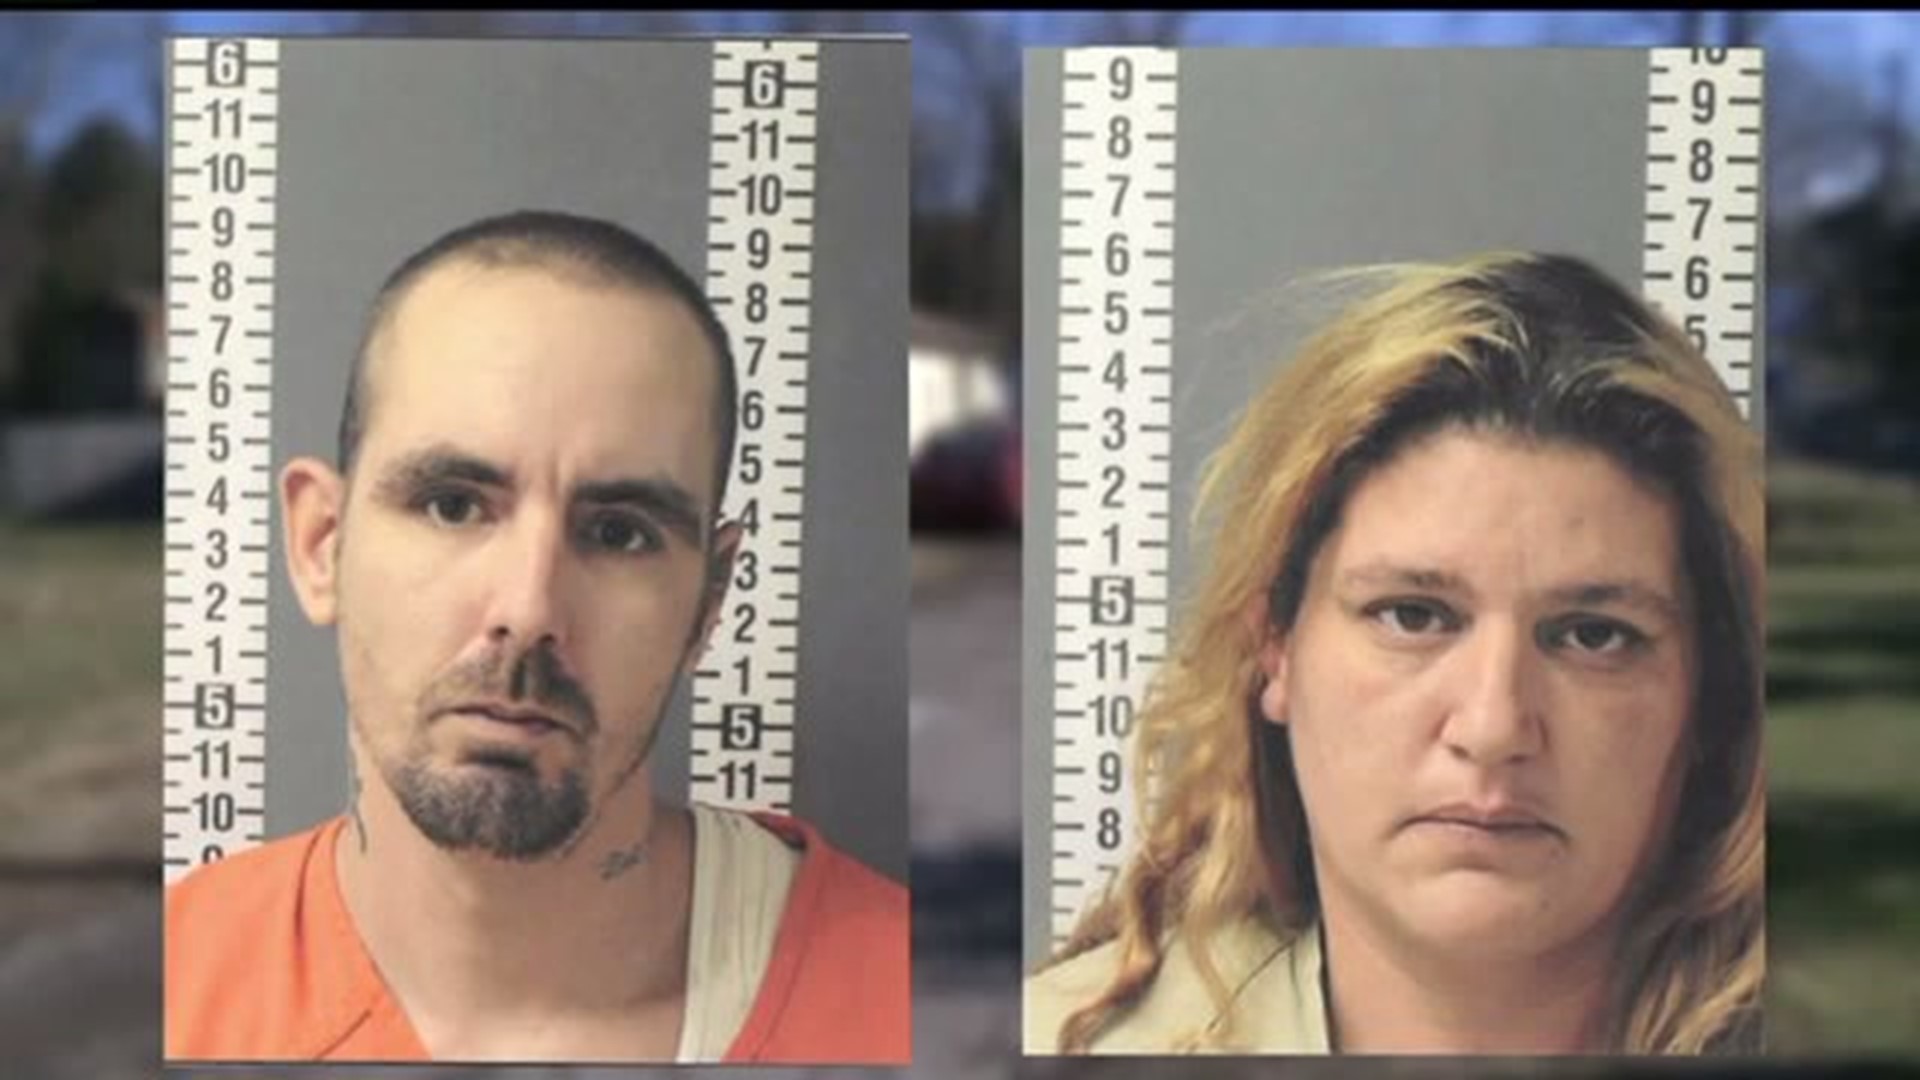 The Dauphin County couple arrested for starving and beating three children is expected in court today